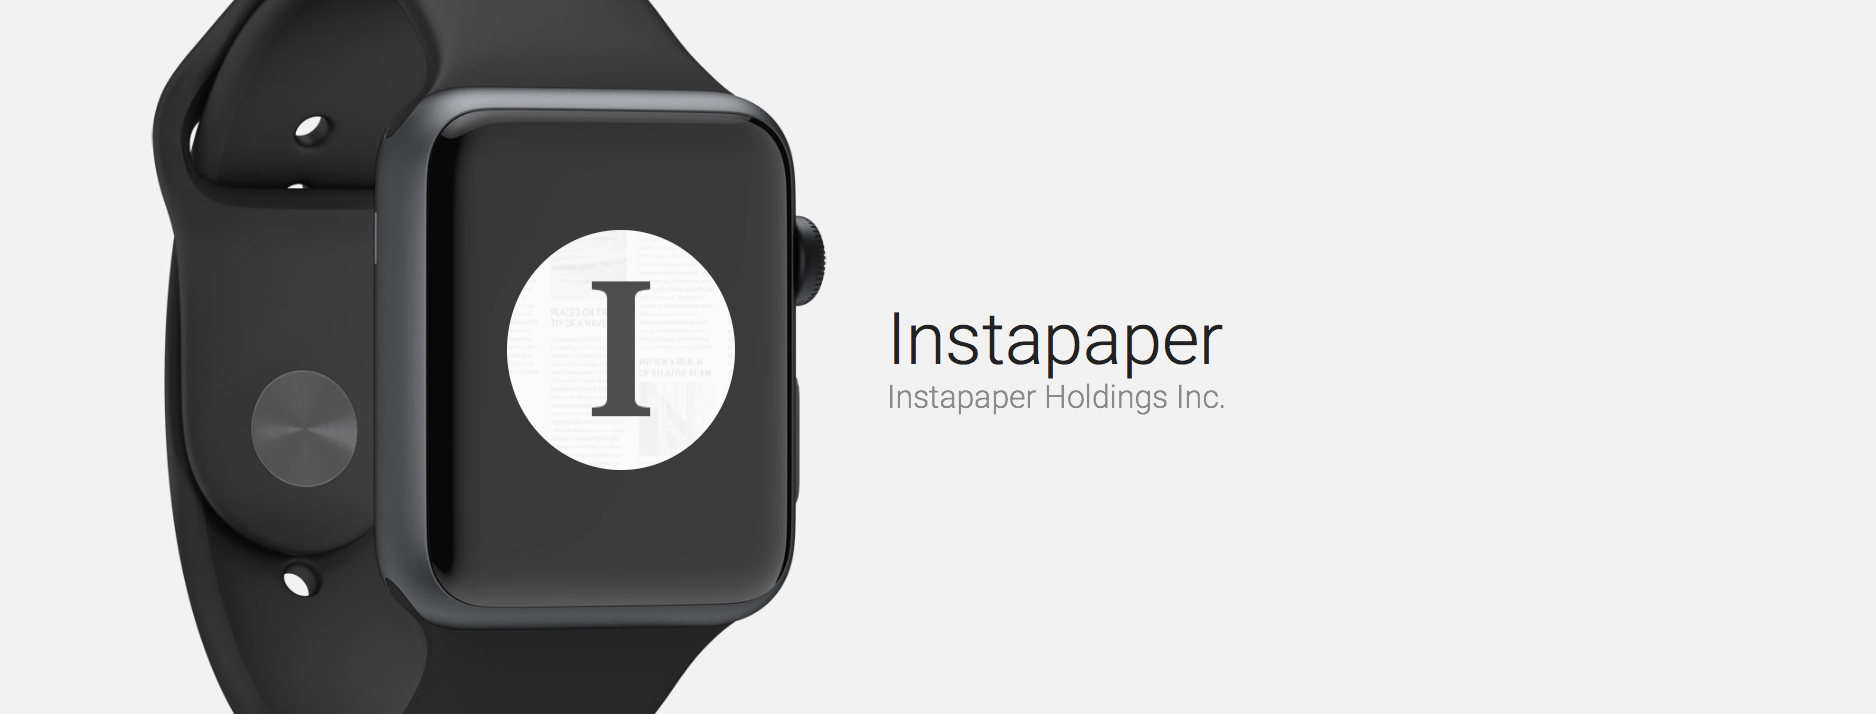 Instapaper Logo - Get Instapaper on Your Apple Watch With New Premium Features For ...